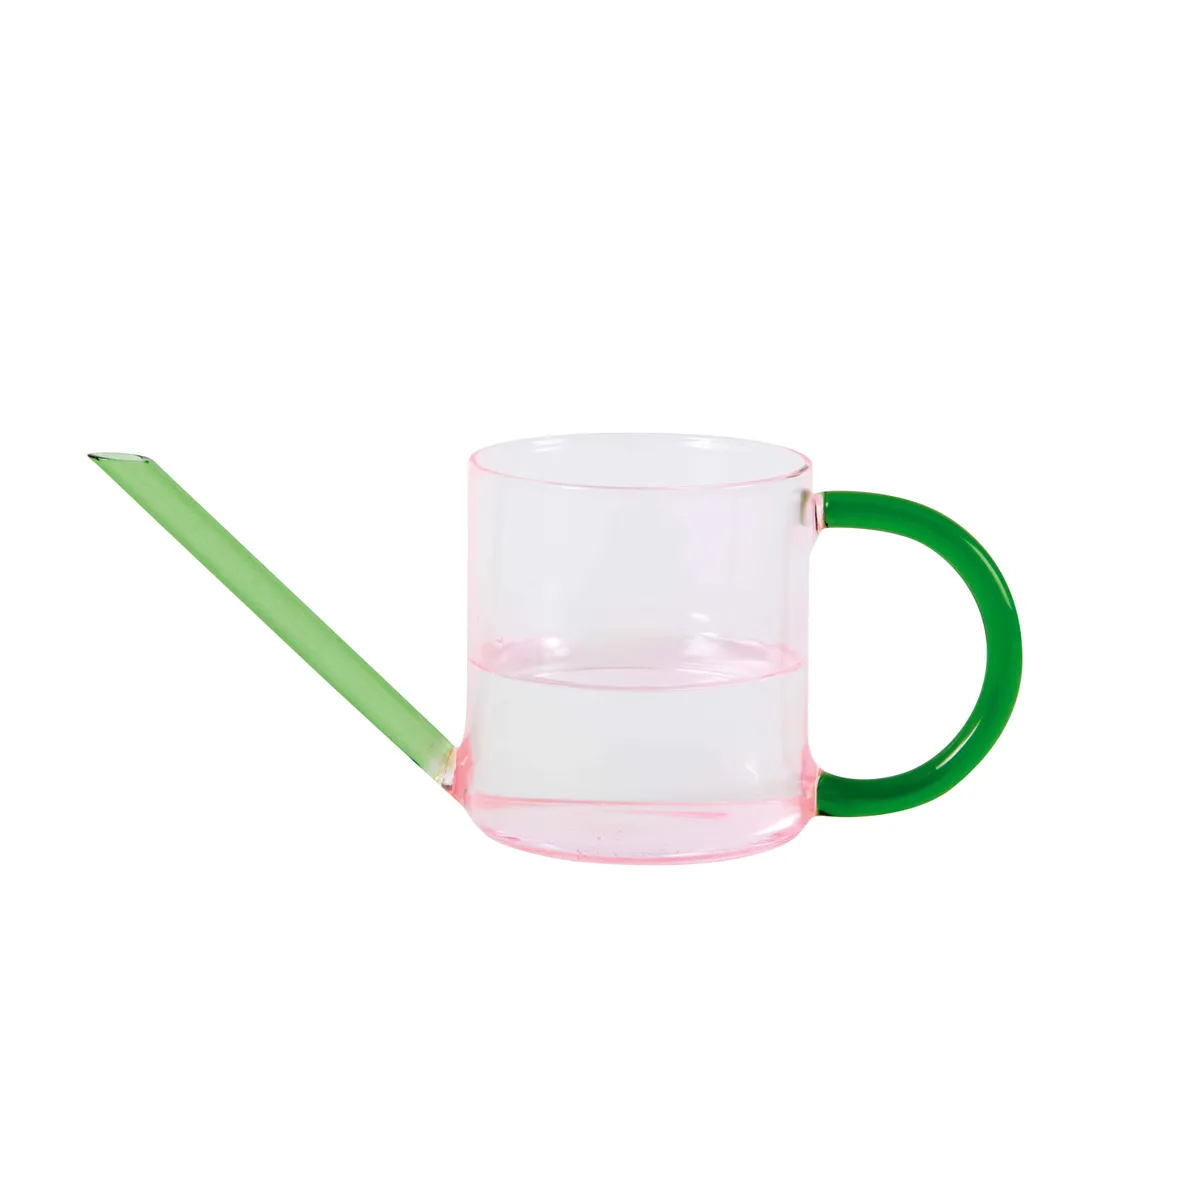 Watering can in Pink and Green, £38, Block Design